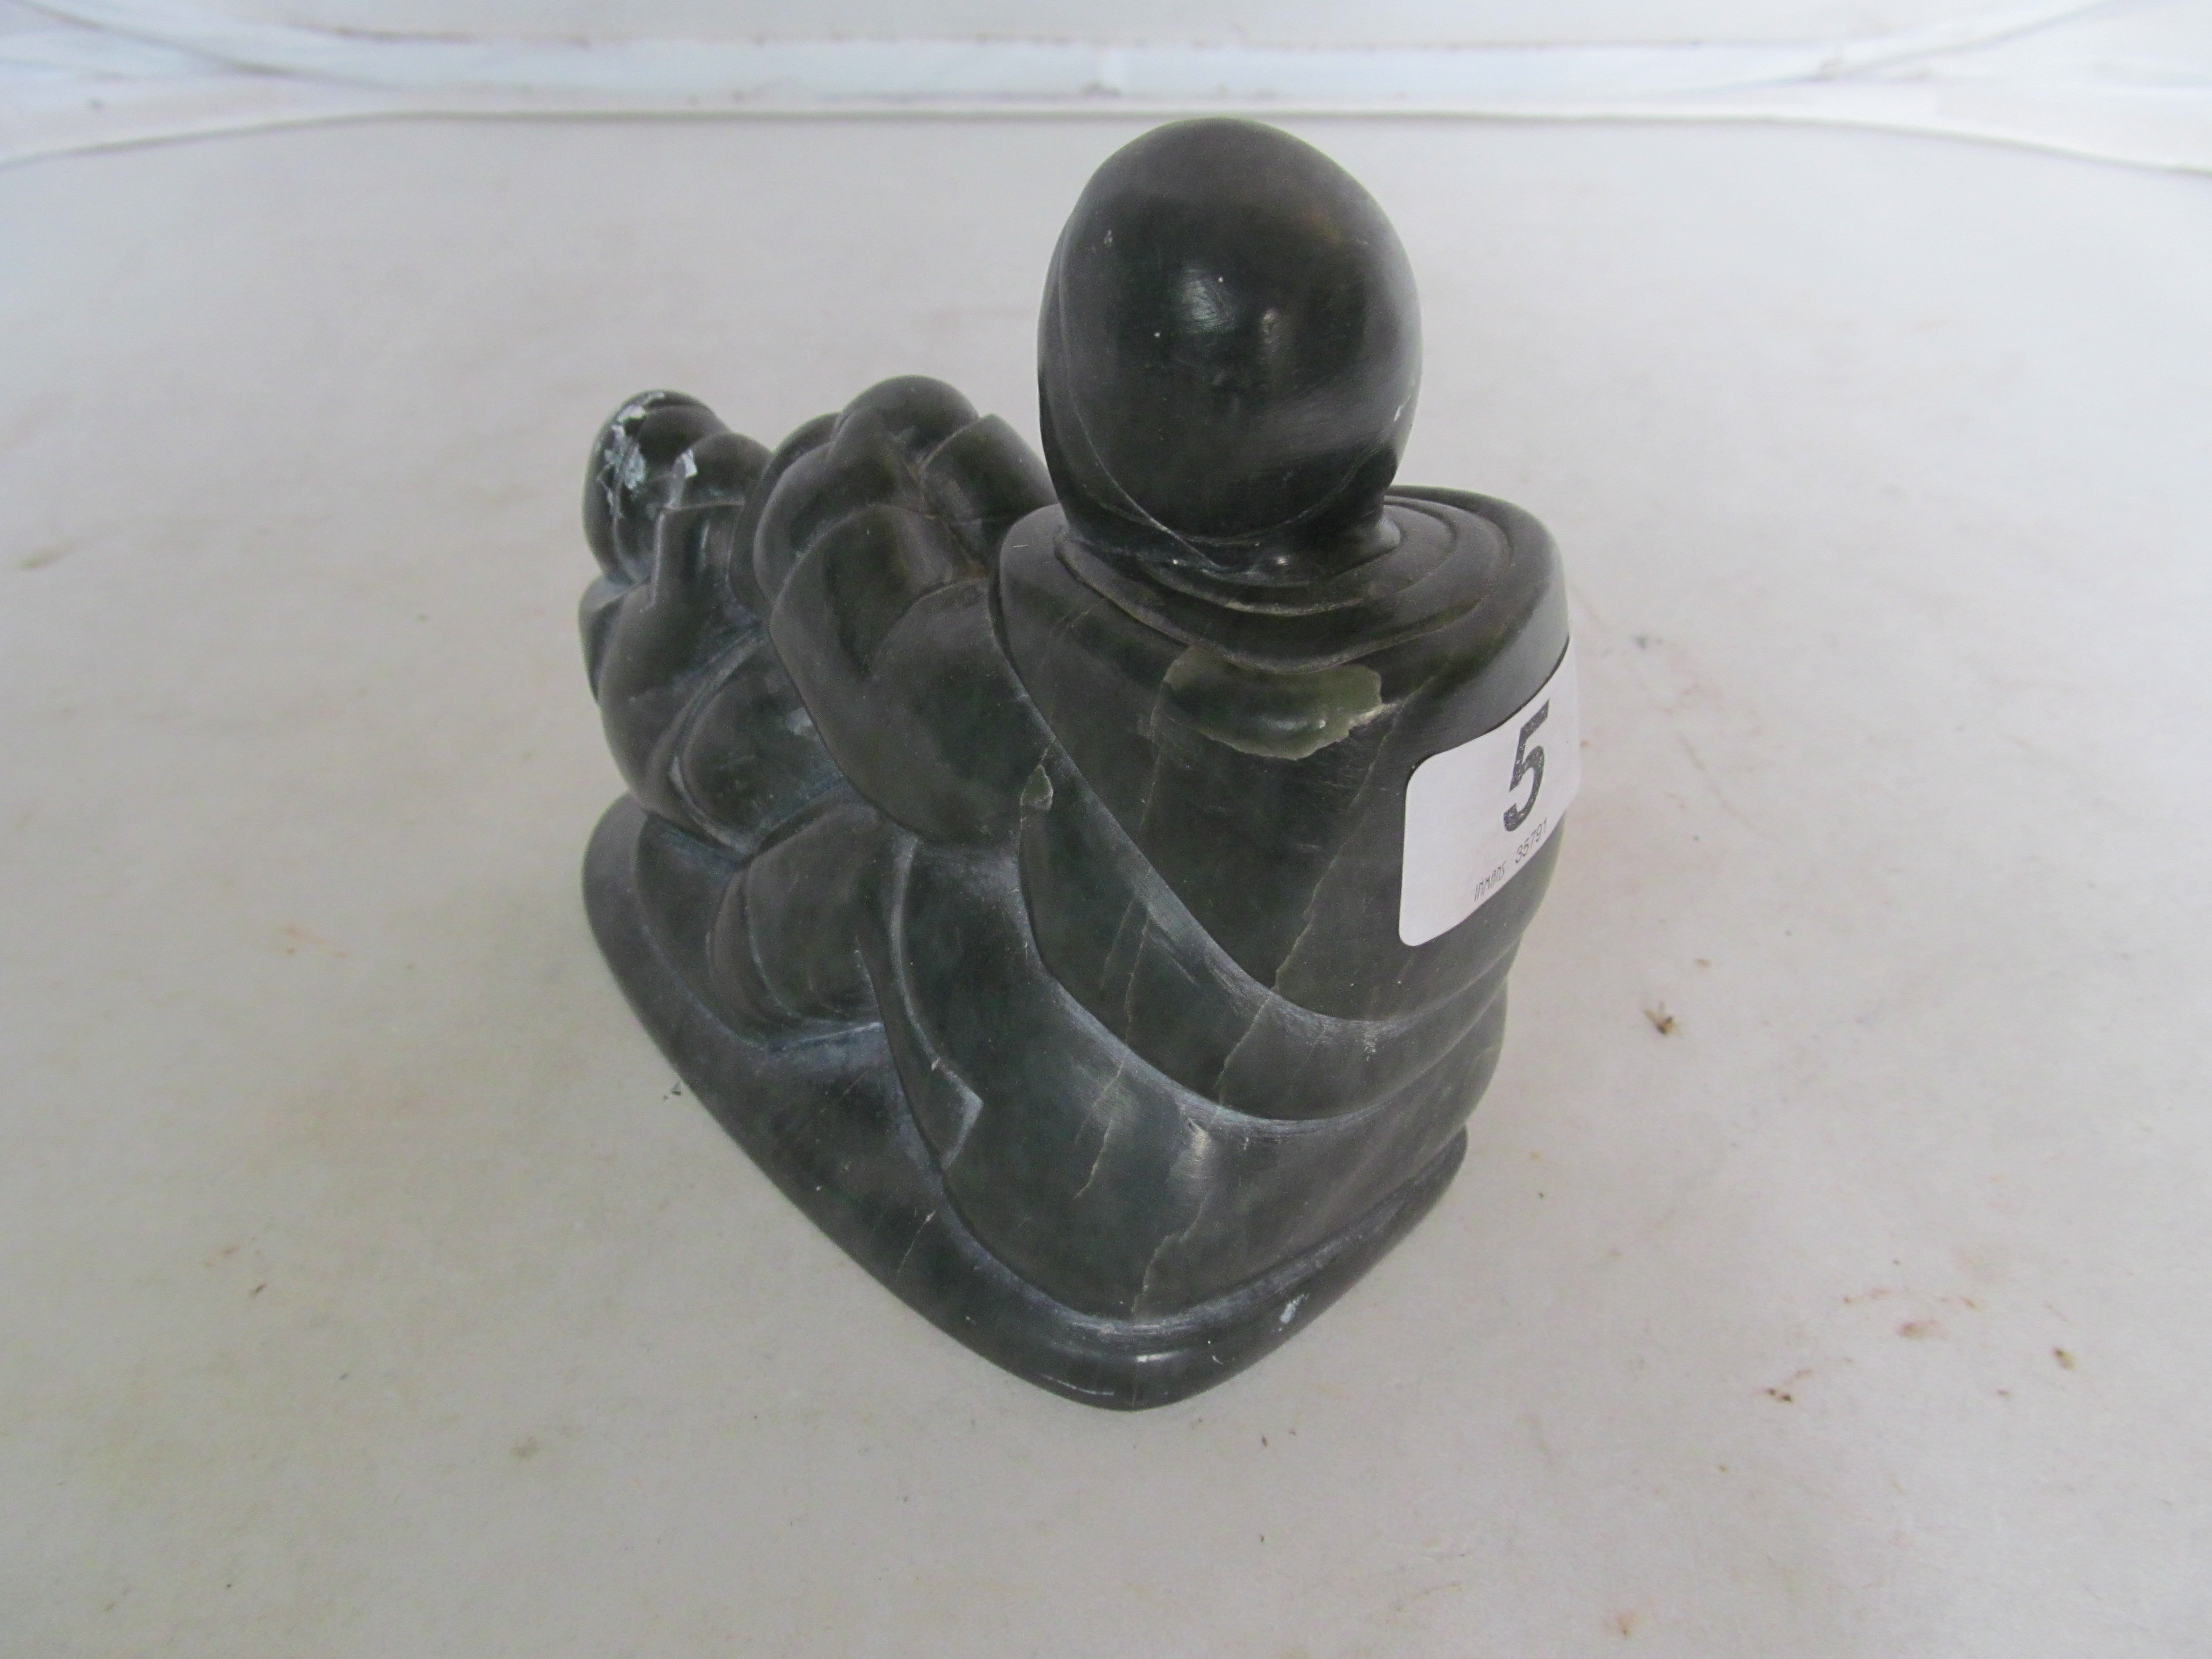 An Inuit carving